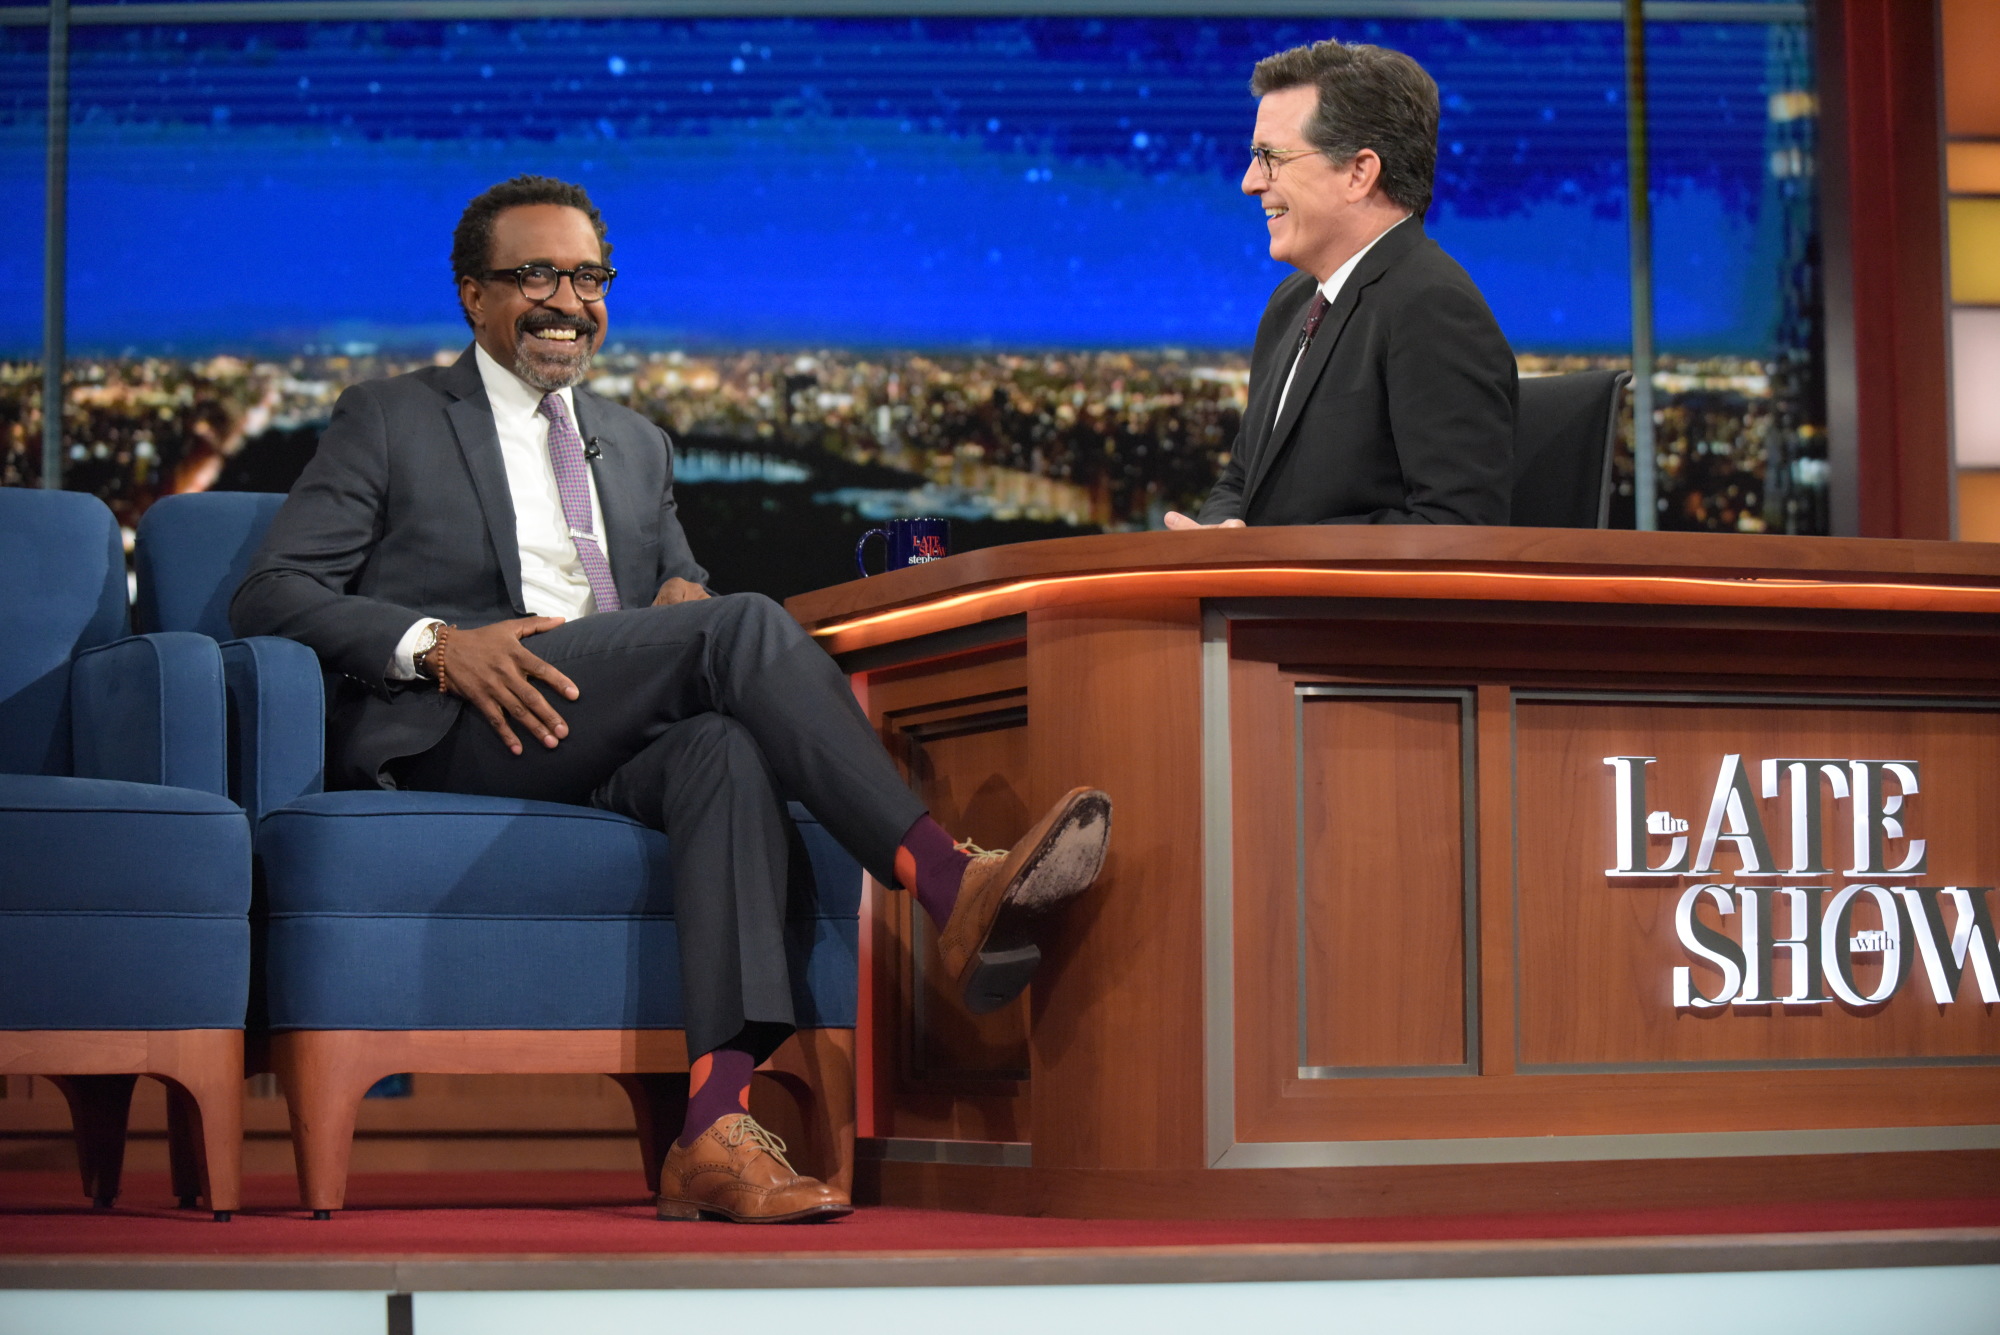 Tim Meadows as guest in Stephen Colbert's "The Late Show with Stephen Colbert" on September 21, 2016, in New York. | Source: Getty Images